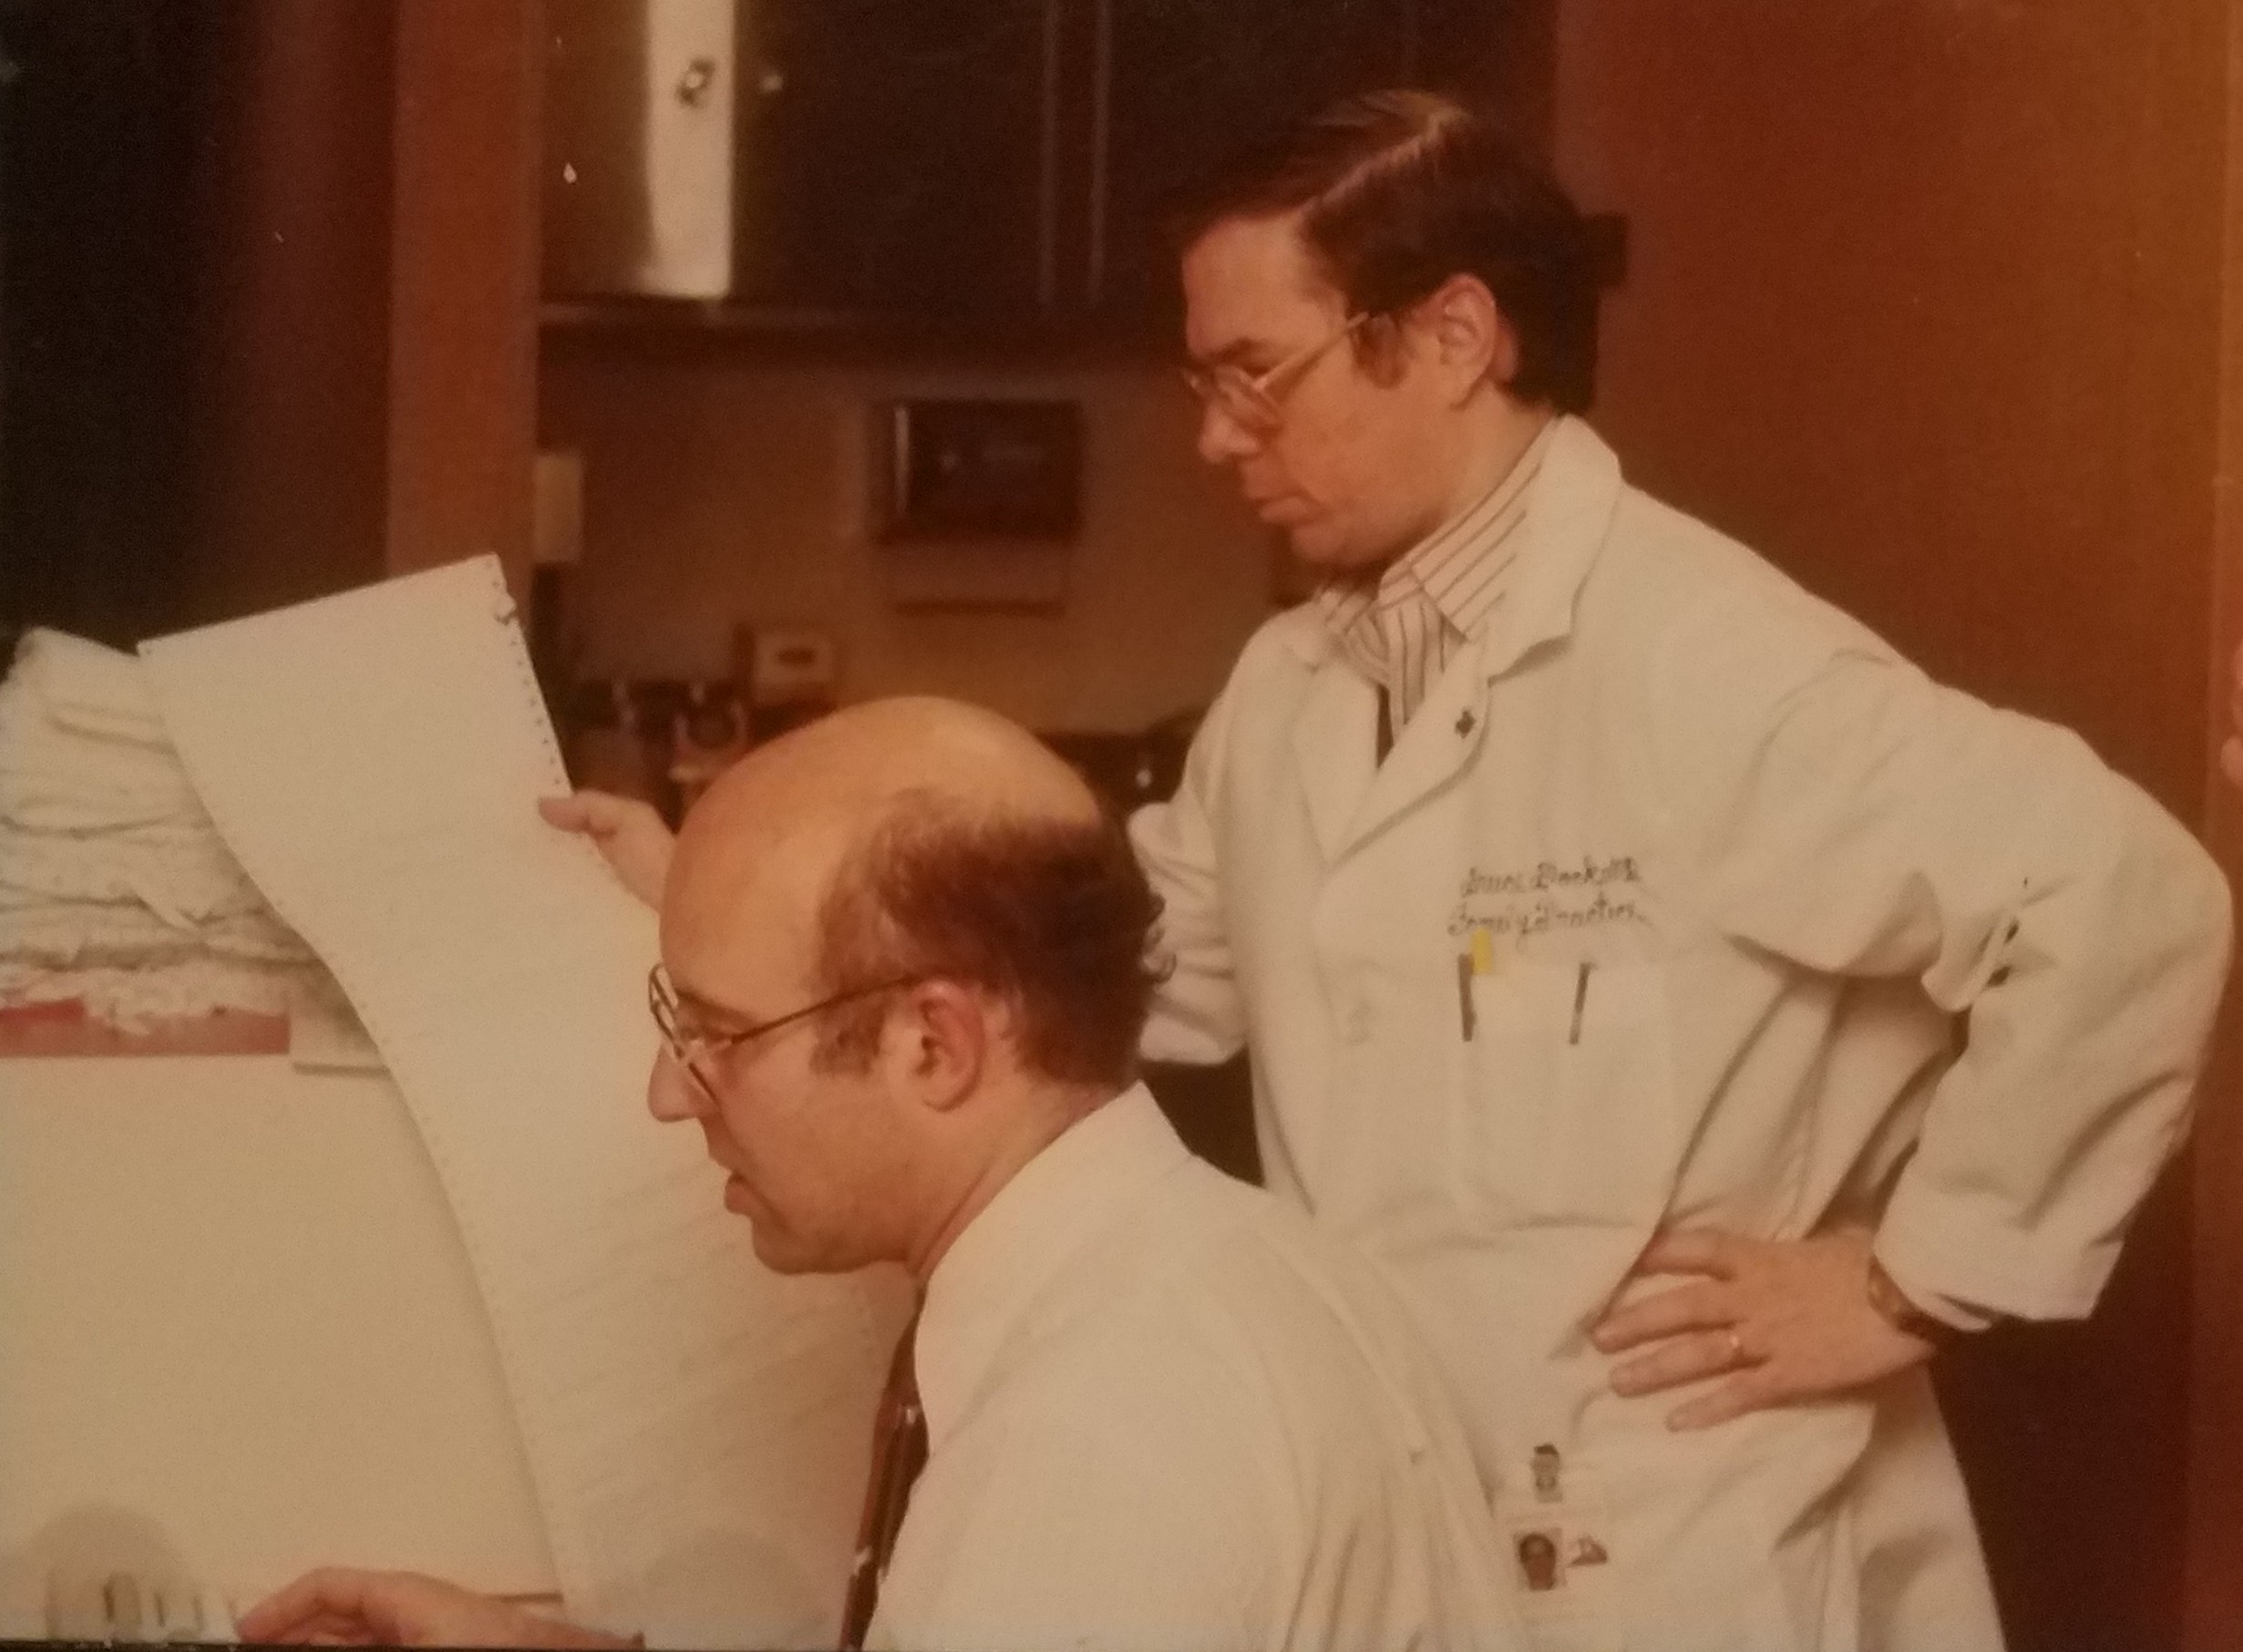 Block in 1984, working on his EHR system.